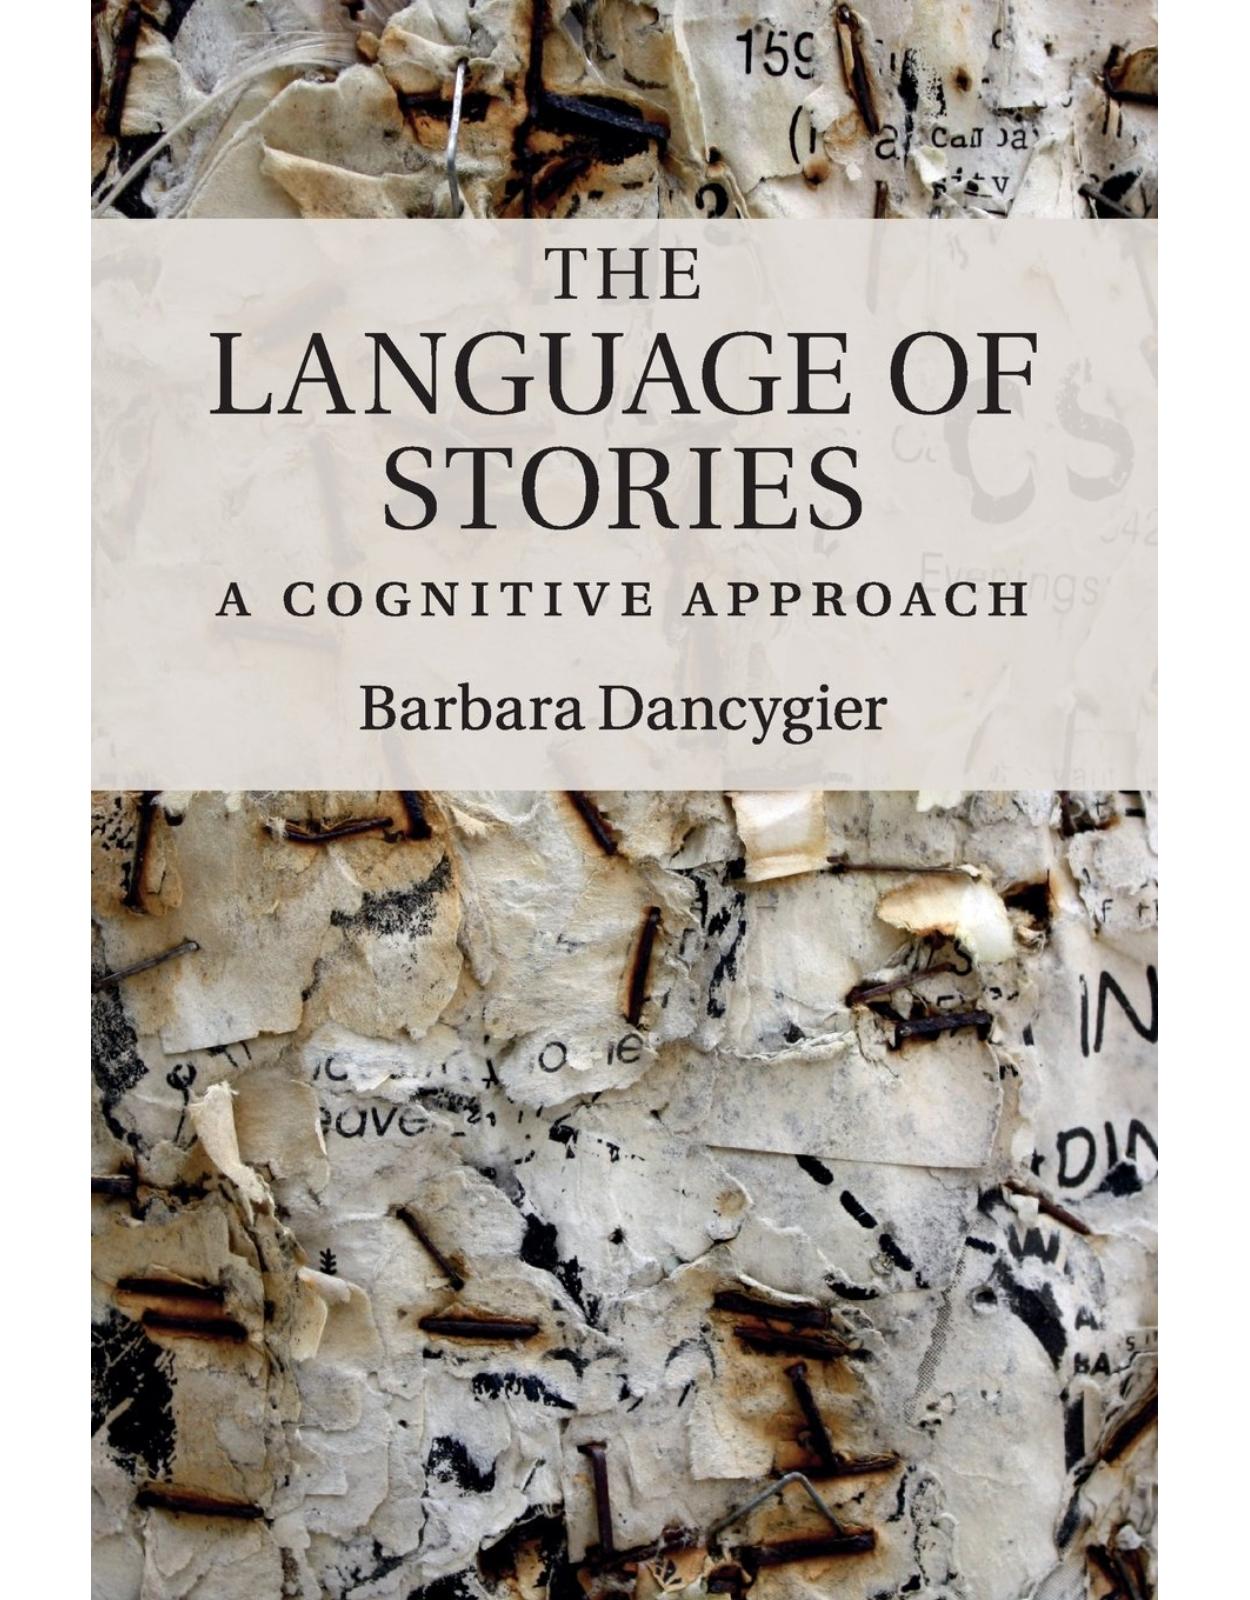 The Language of Stories: A Cognitive Approach